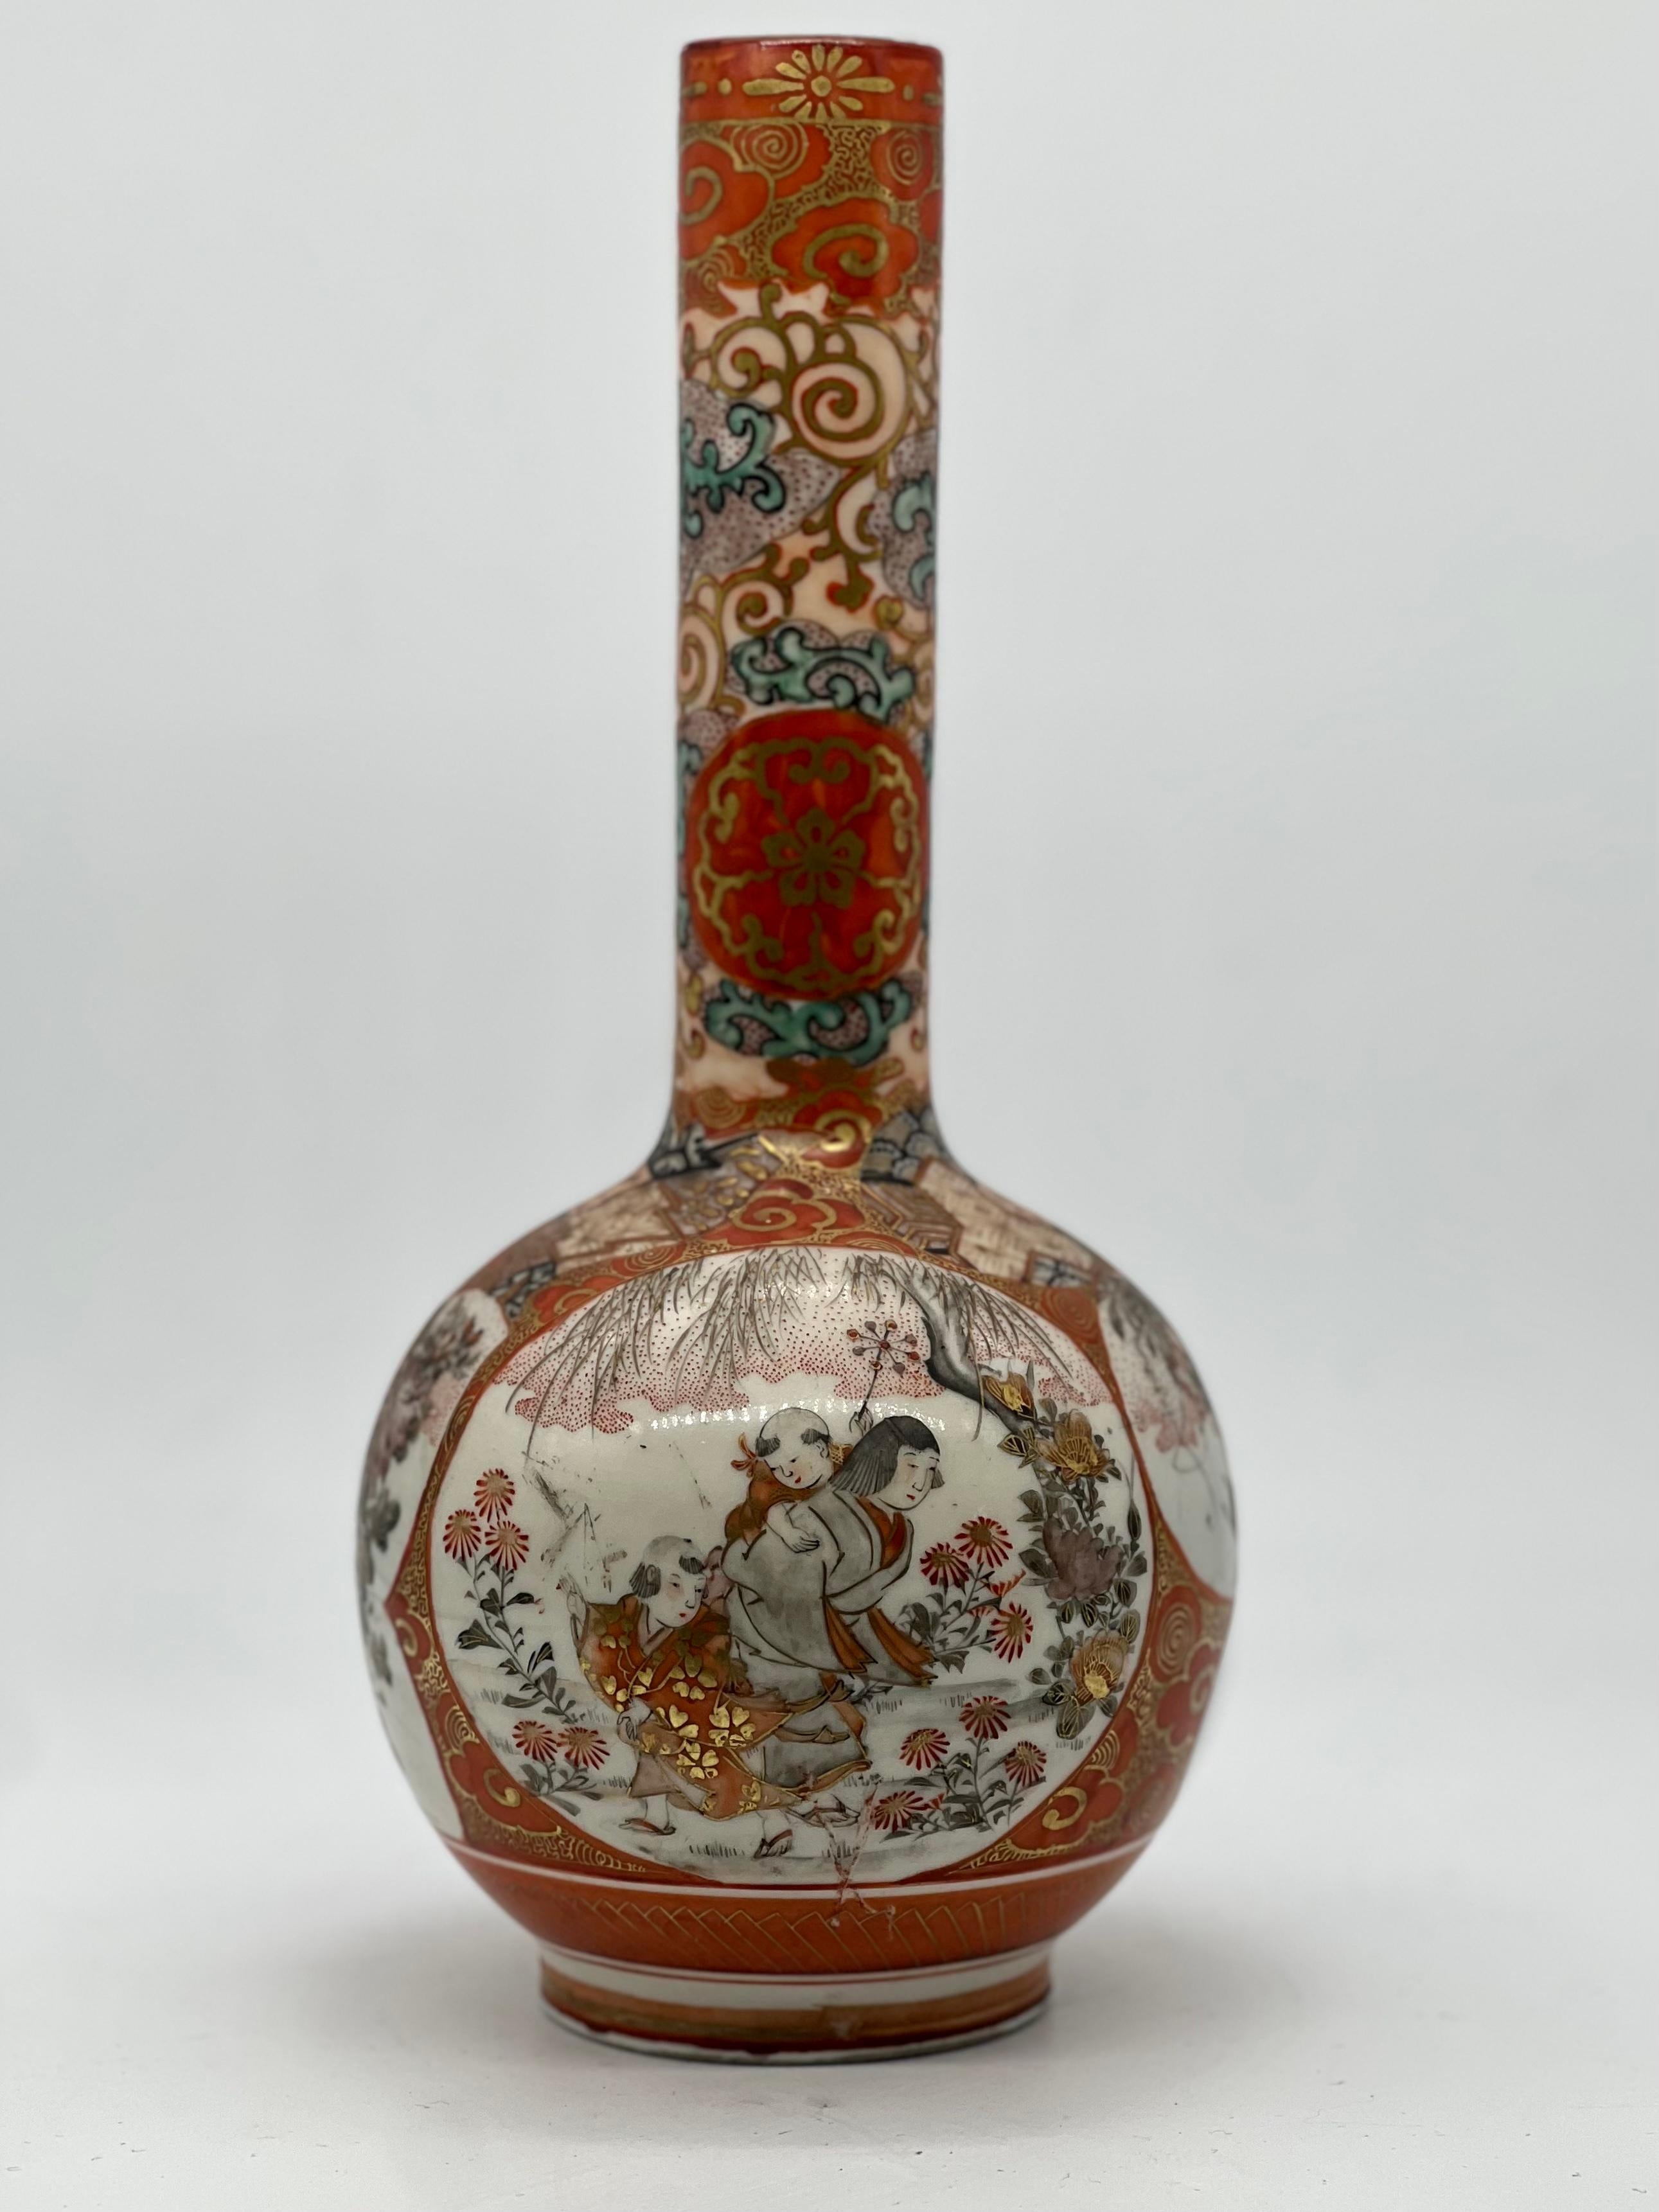 
A Fine Japanese Kutani Bottle Vase. Signed.

Meiji period.



A very nice Japanese Meiji Period (1867-1912) Bottle shaped Kutani vase decorated with images of birds, flowers and butterflies on one side and a woman with two Japanese boys on other